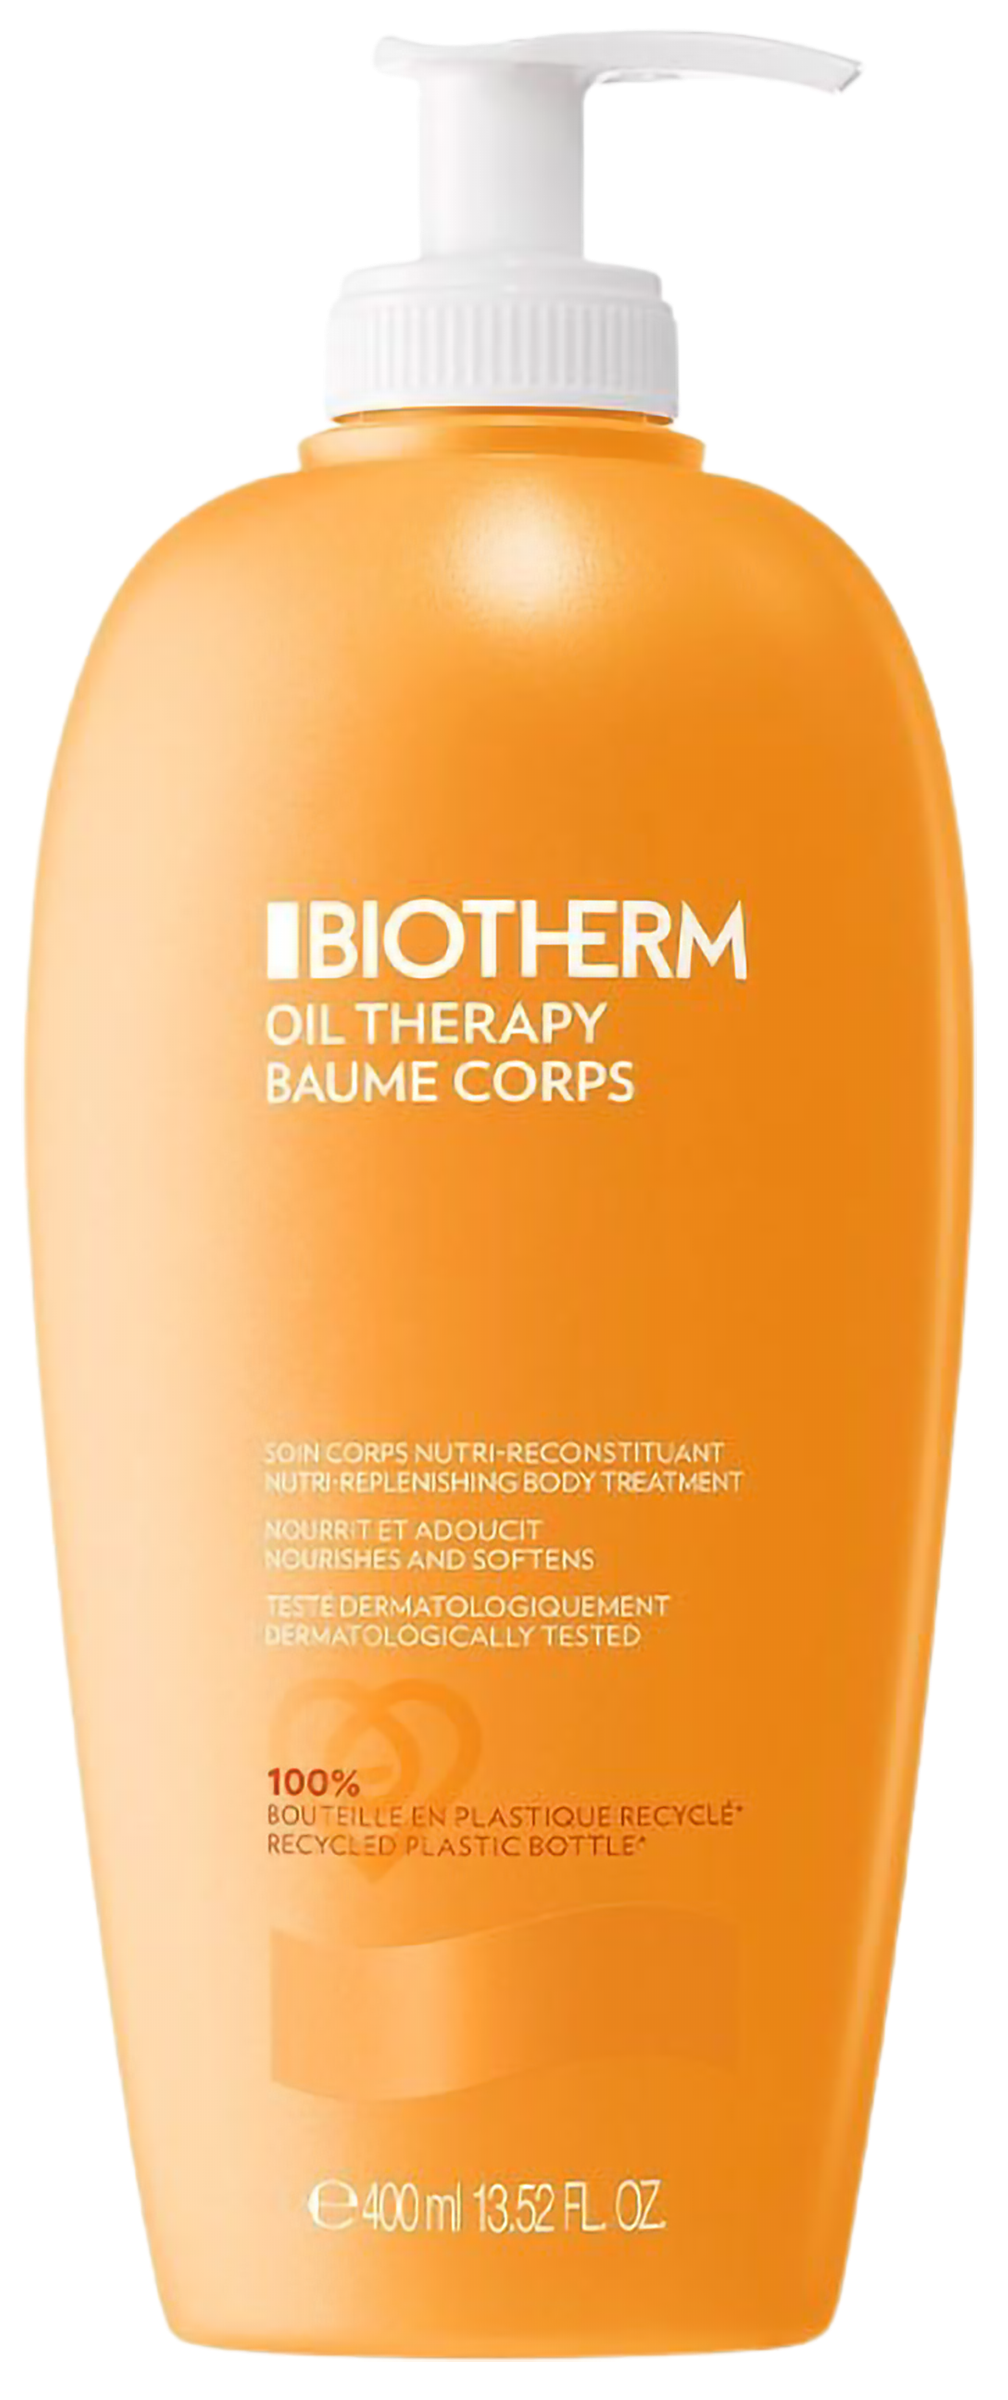 Biotherm Oil Therapy Baume Corps Body Lotion, 400 ml